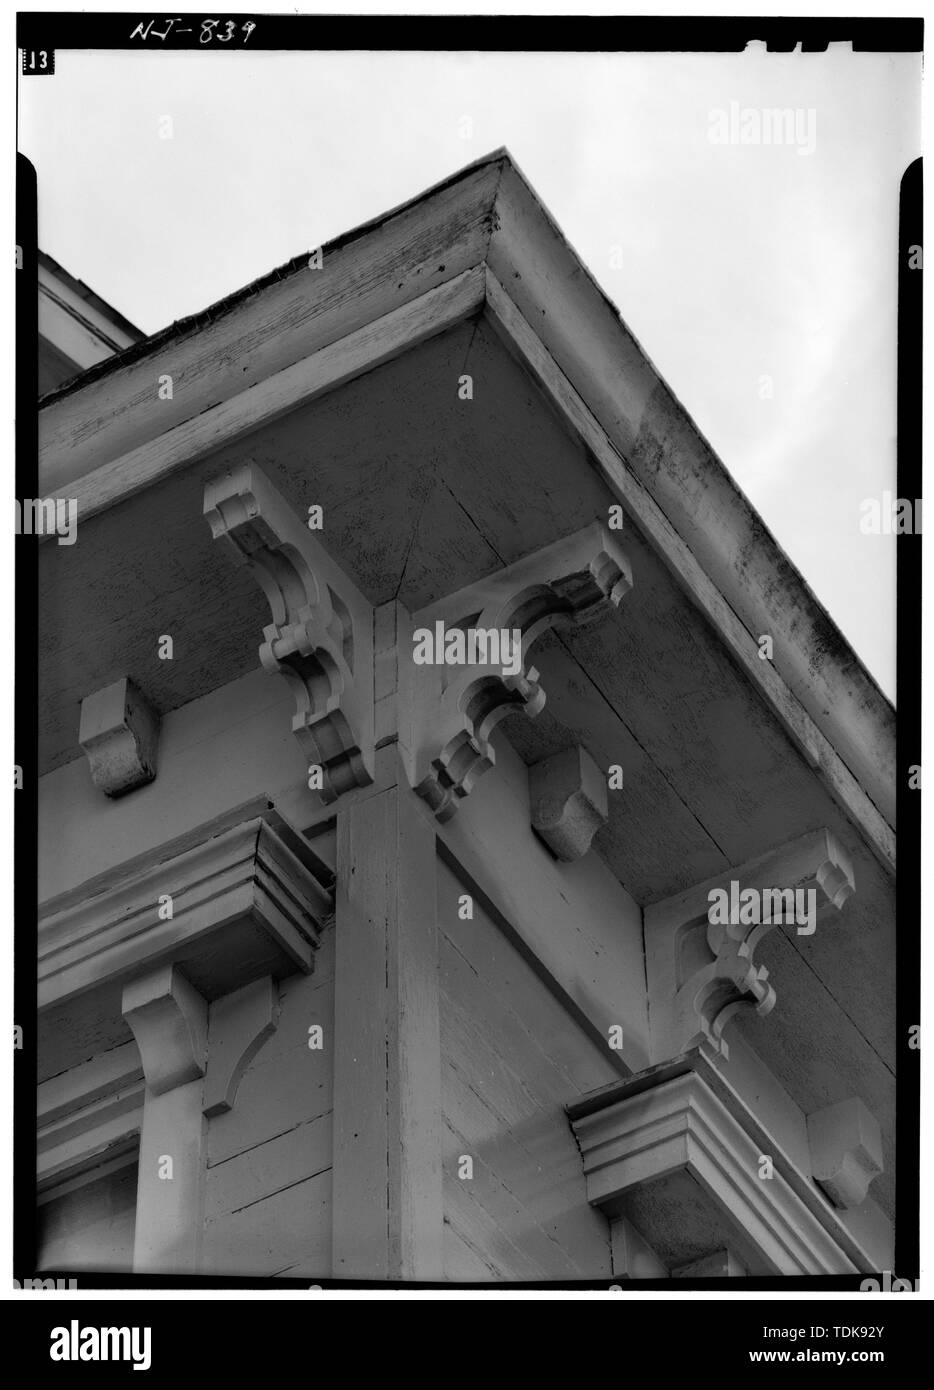 October 1972 DETAIL OF CORNICE BRACKETS, NORTH SECTION - Mullica Hill Town Hall, South Main Street (Bridgeton Pike) and Woodstown Road, Mullica Hill, Gloucester County, NJ Stock Photo